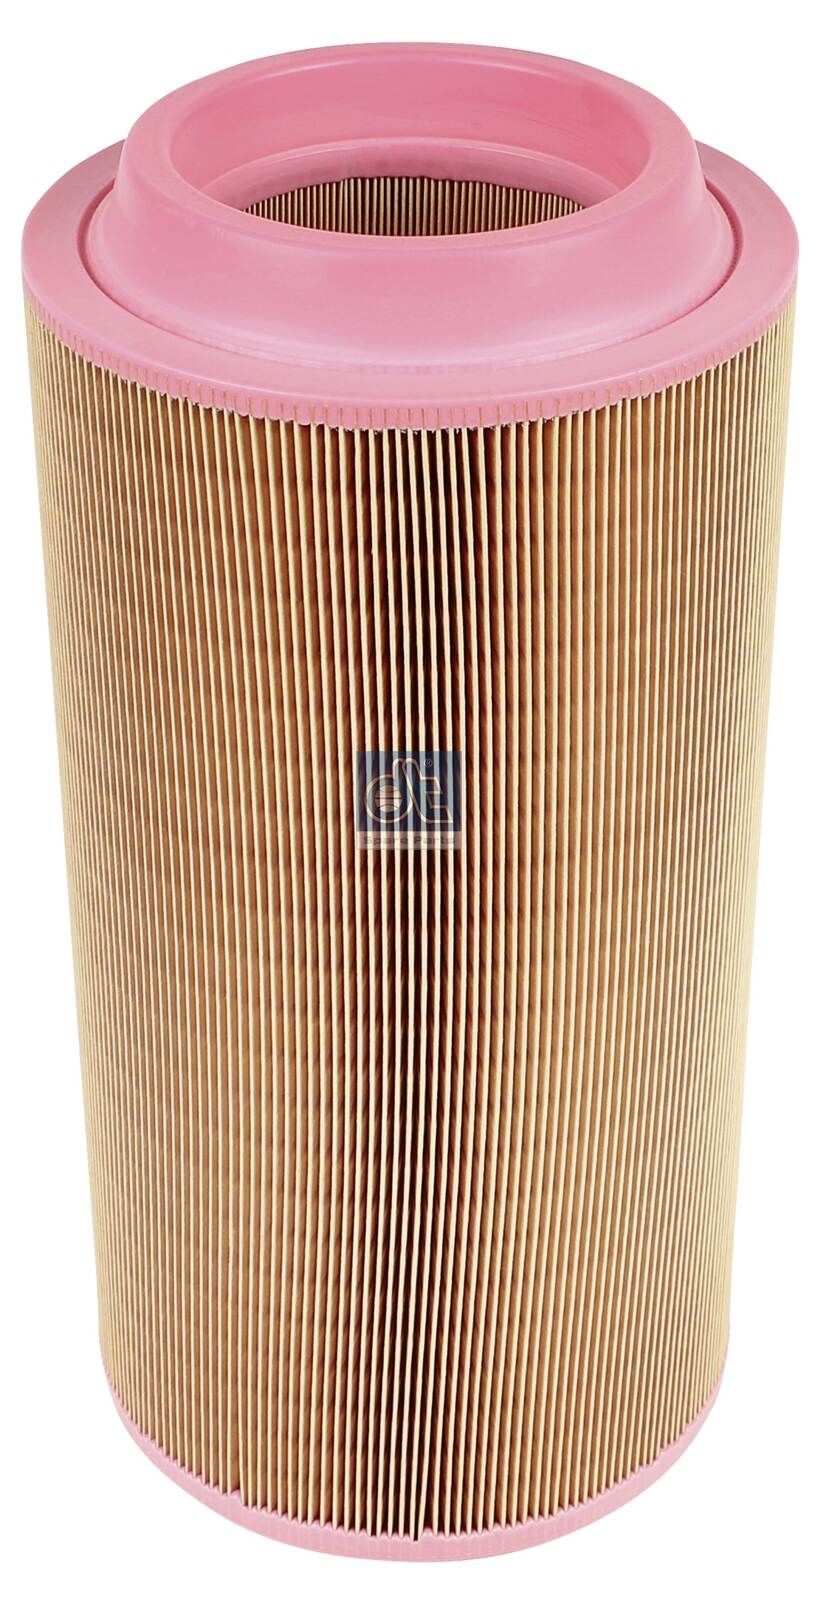 C 20 500 DT Spare Parts 4.65866 Air filter 8811 0556